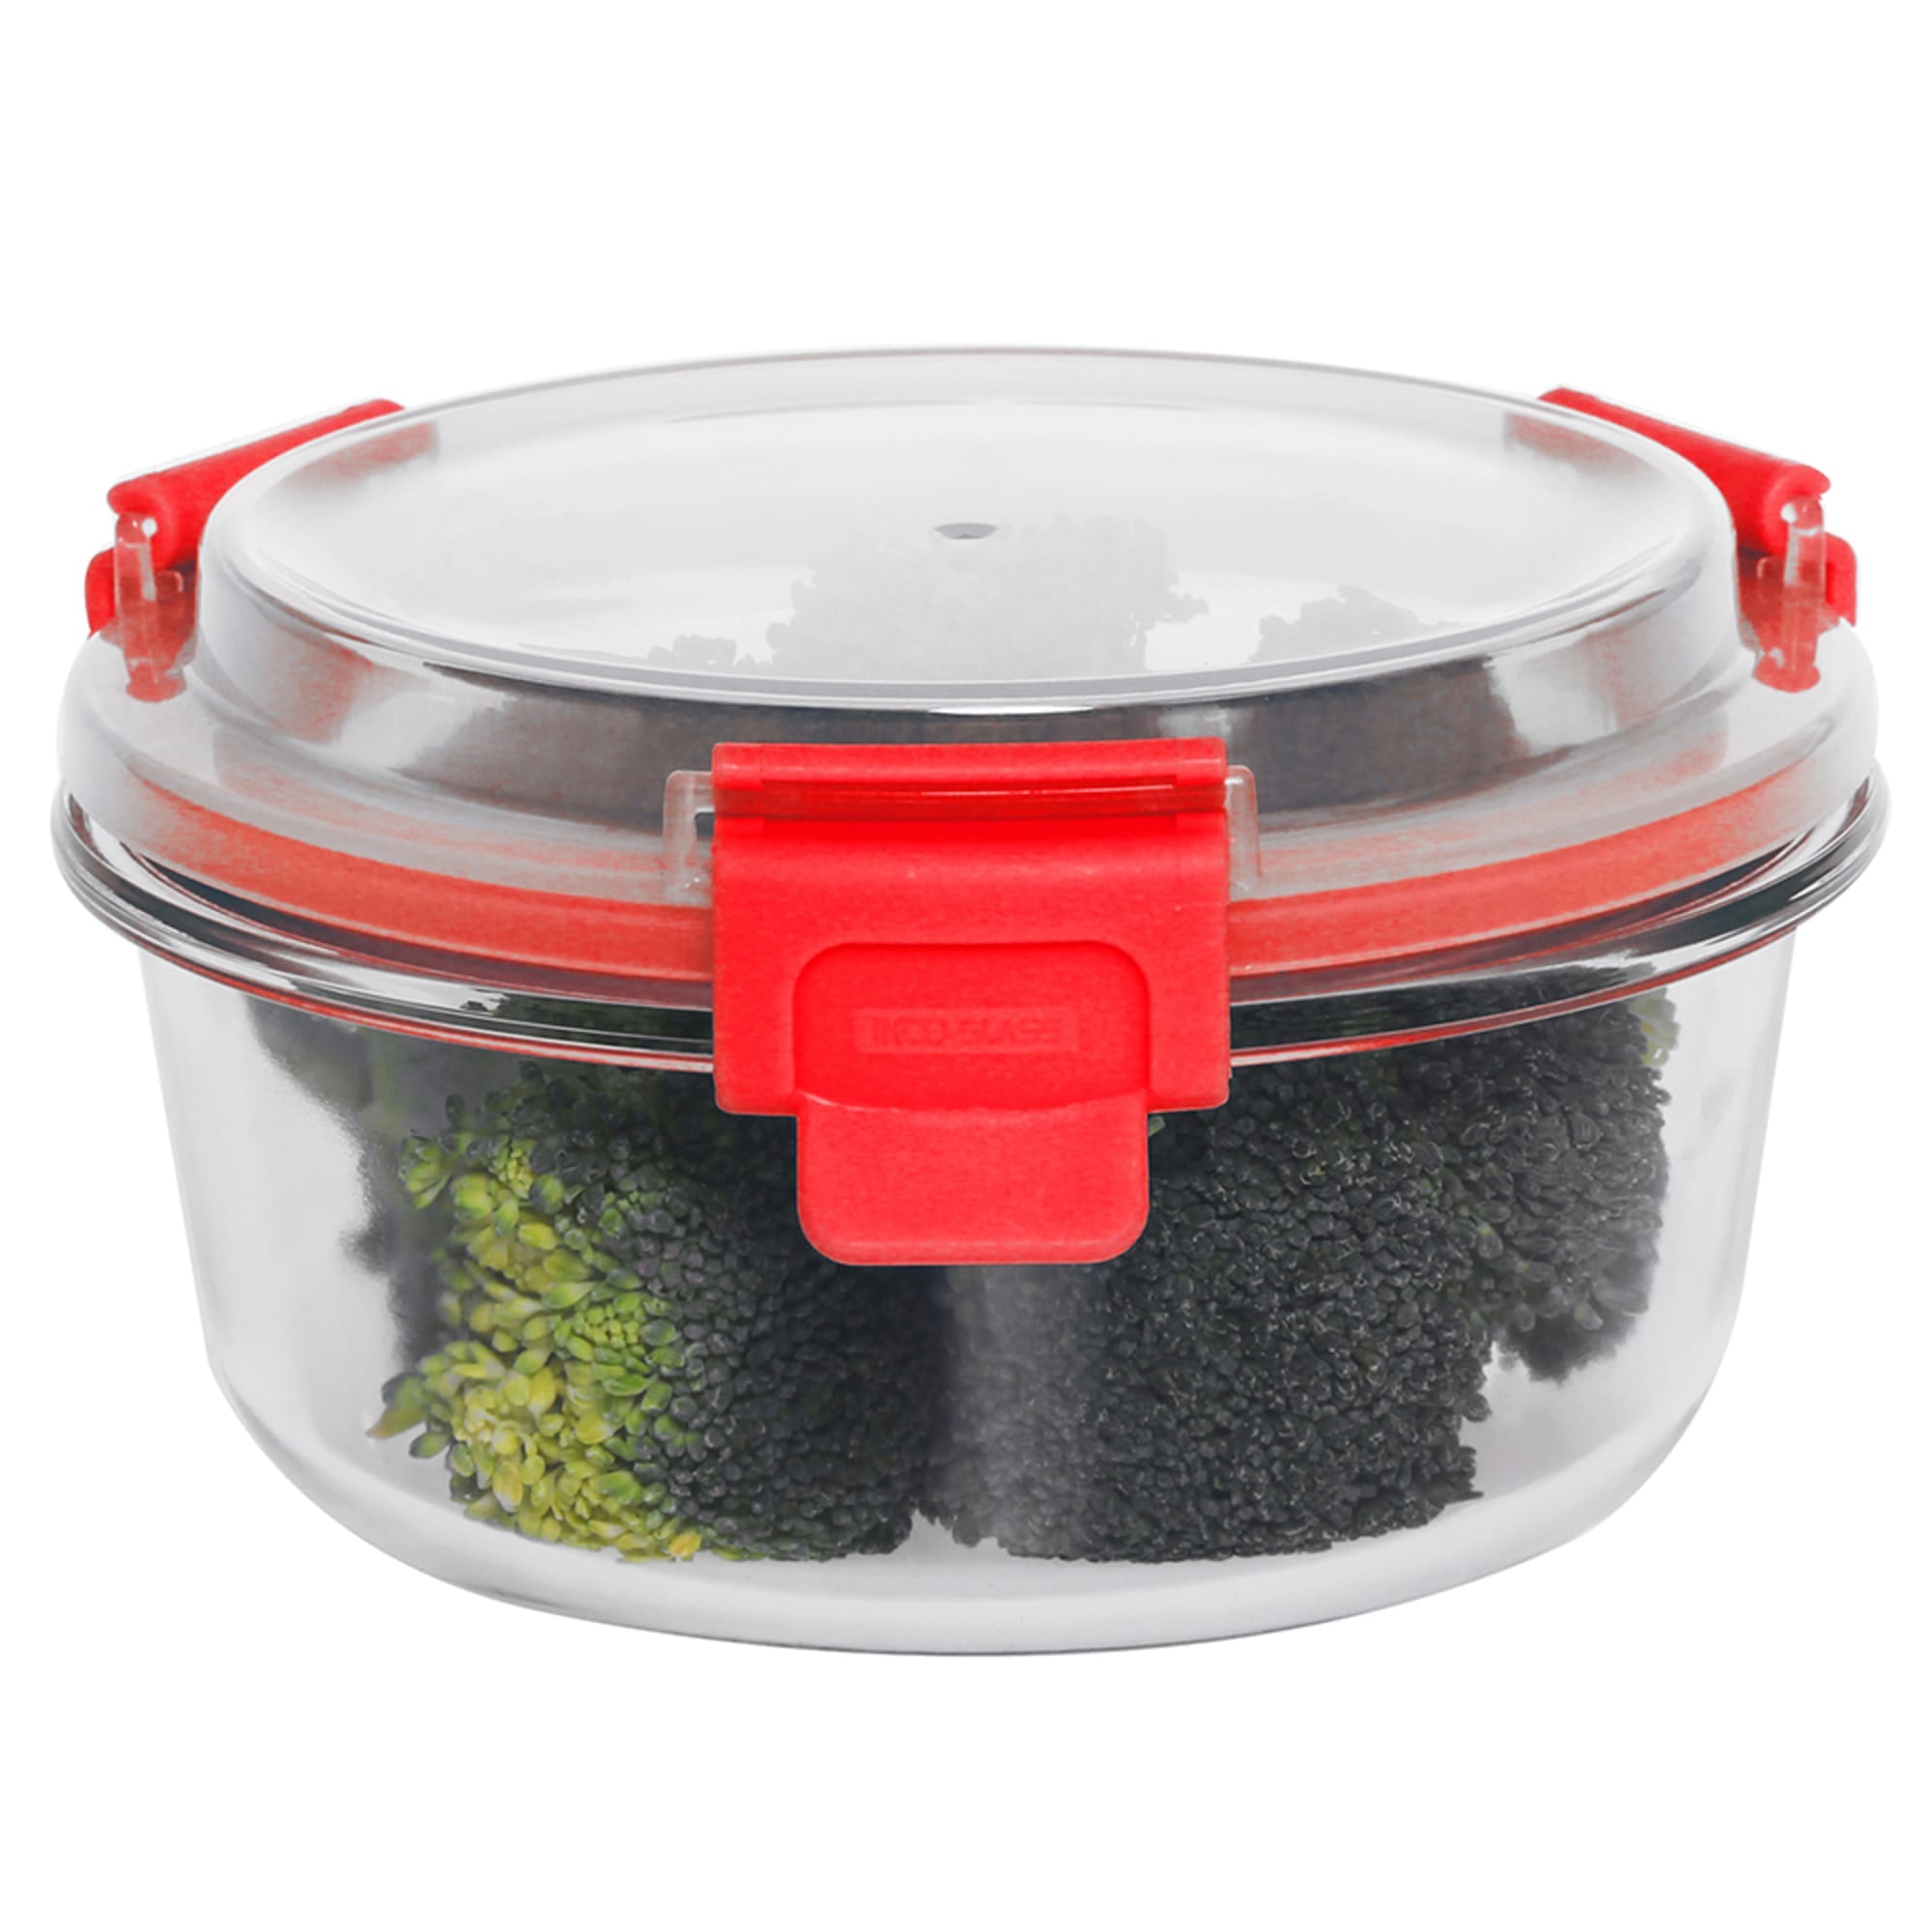 Home Basics Leak Proof  21oz. Round Glass Food Storage Container With Plastic Lid, Red $5.00 EACH, CASE PACK OF 12